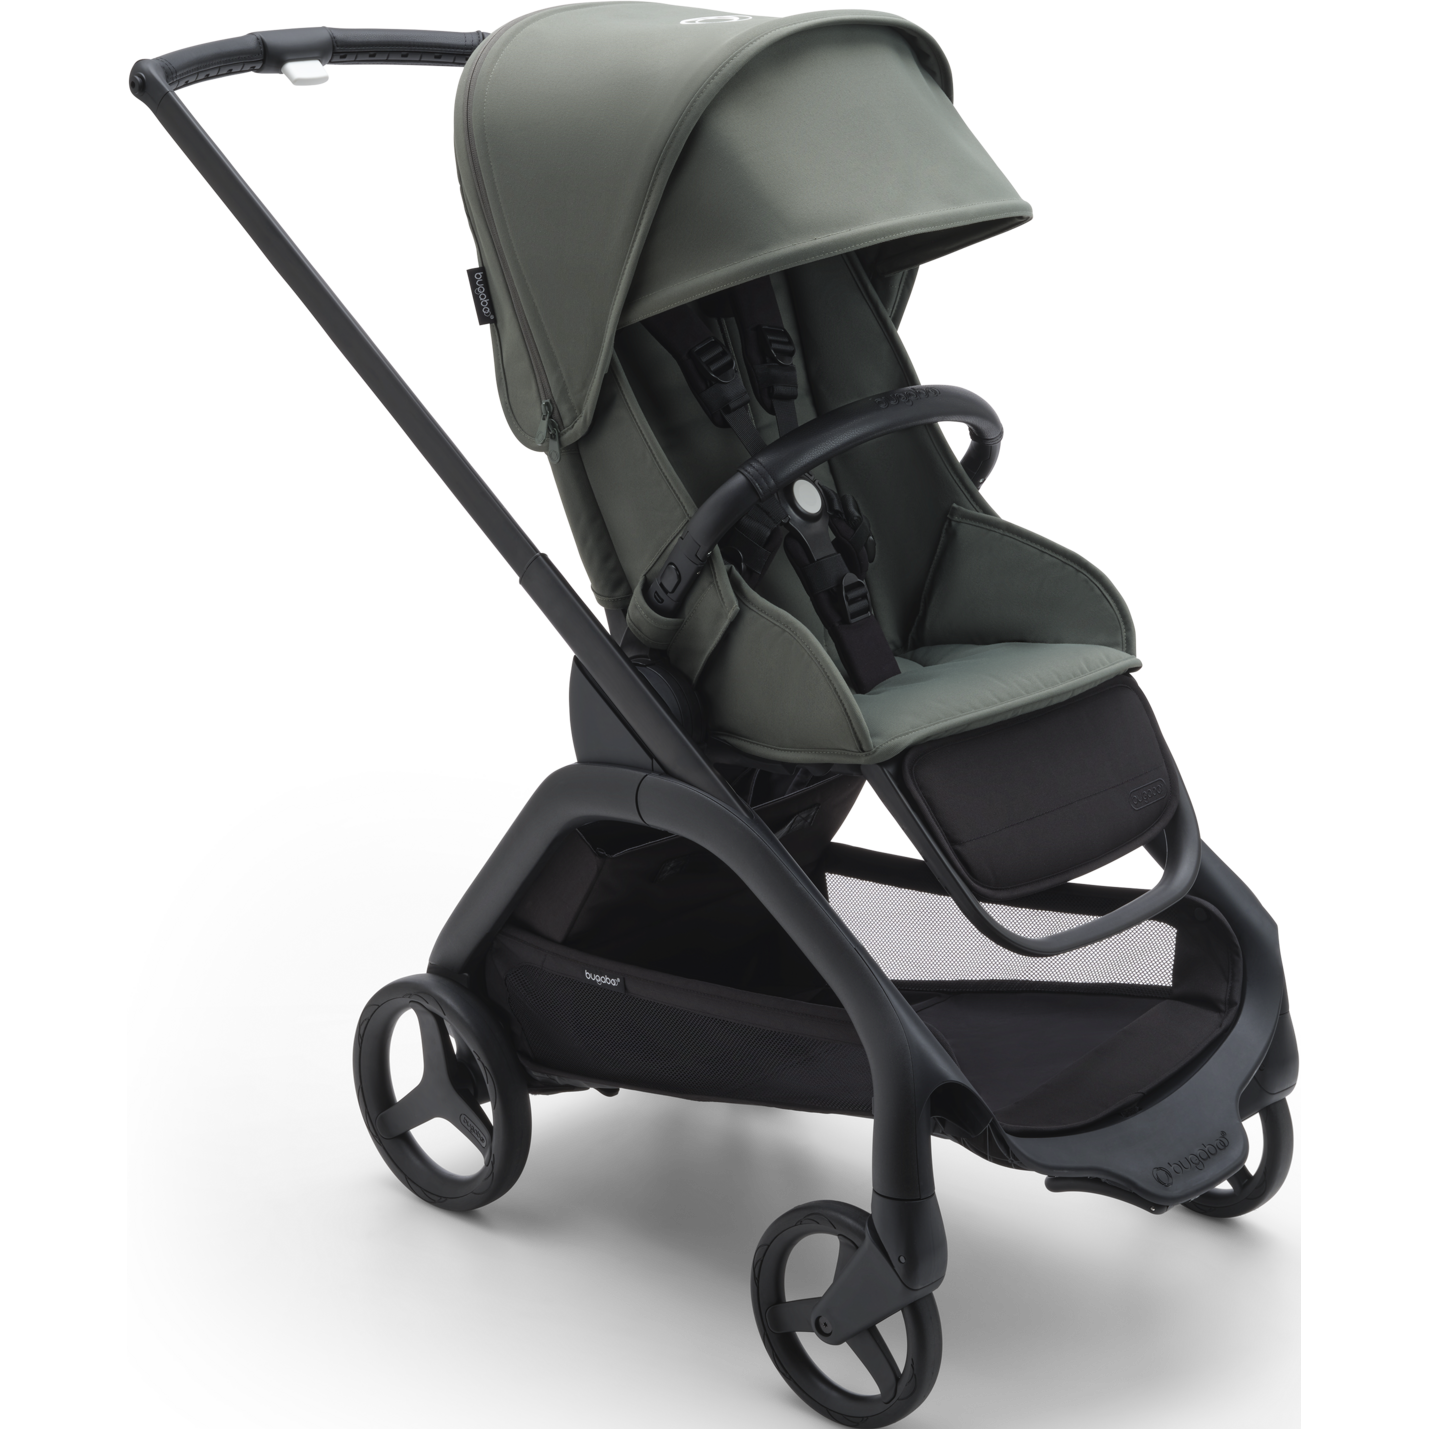 Buy black-forest-green-forest-green Bugaboo Dragonfly Stroller